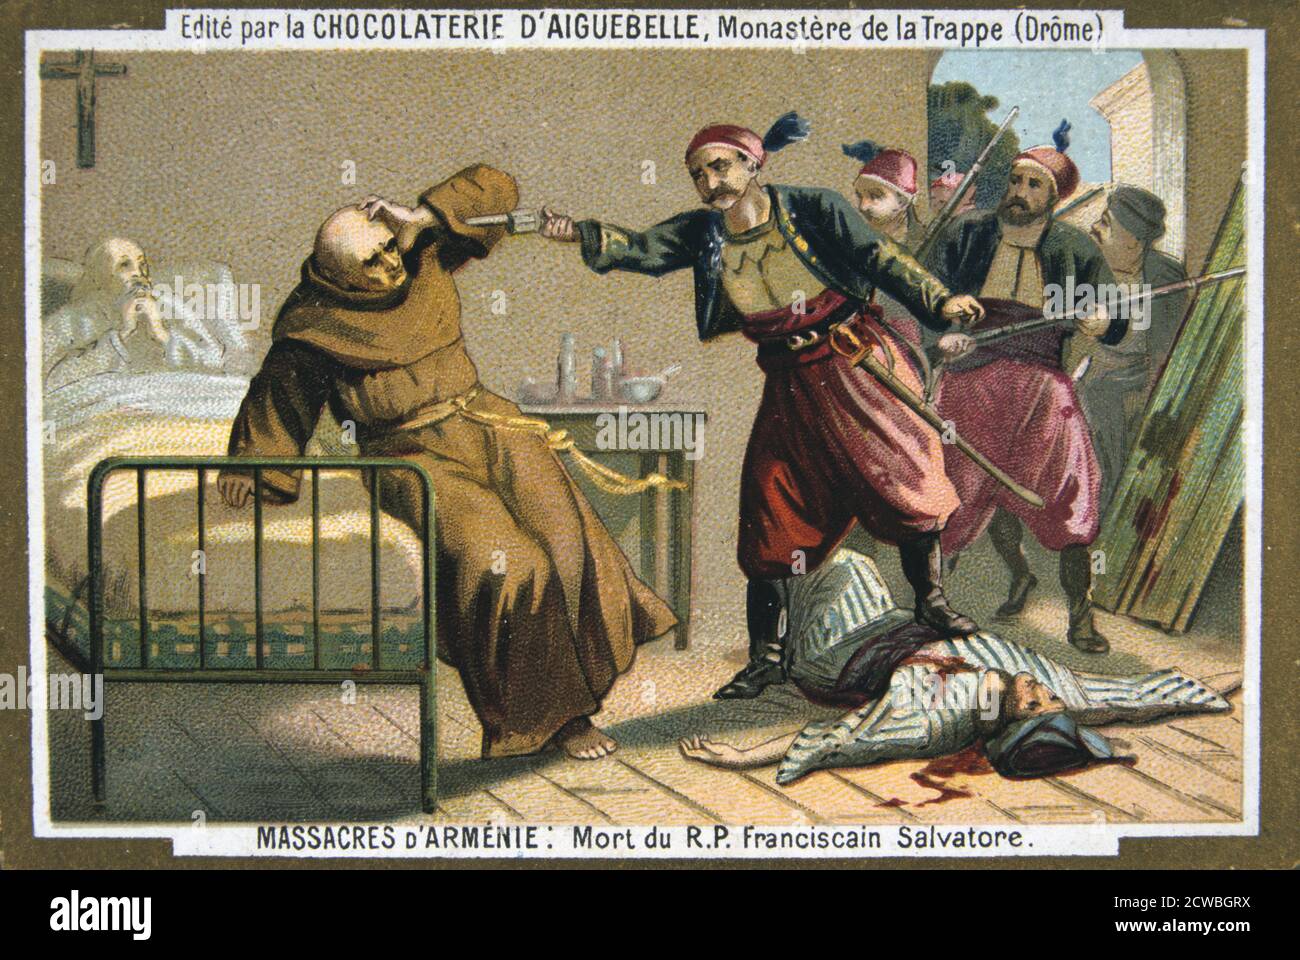 Death of the Reverend Father Salvatore, a Franciscan monk, 1895. Eurocentric portrayal of historical events - scene from the Massacres of Armenia card series produced by the chocolate factory at the Monastery of Aiguebelle. Stock Photo